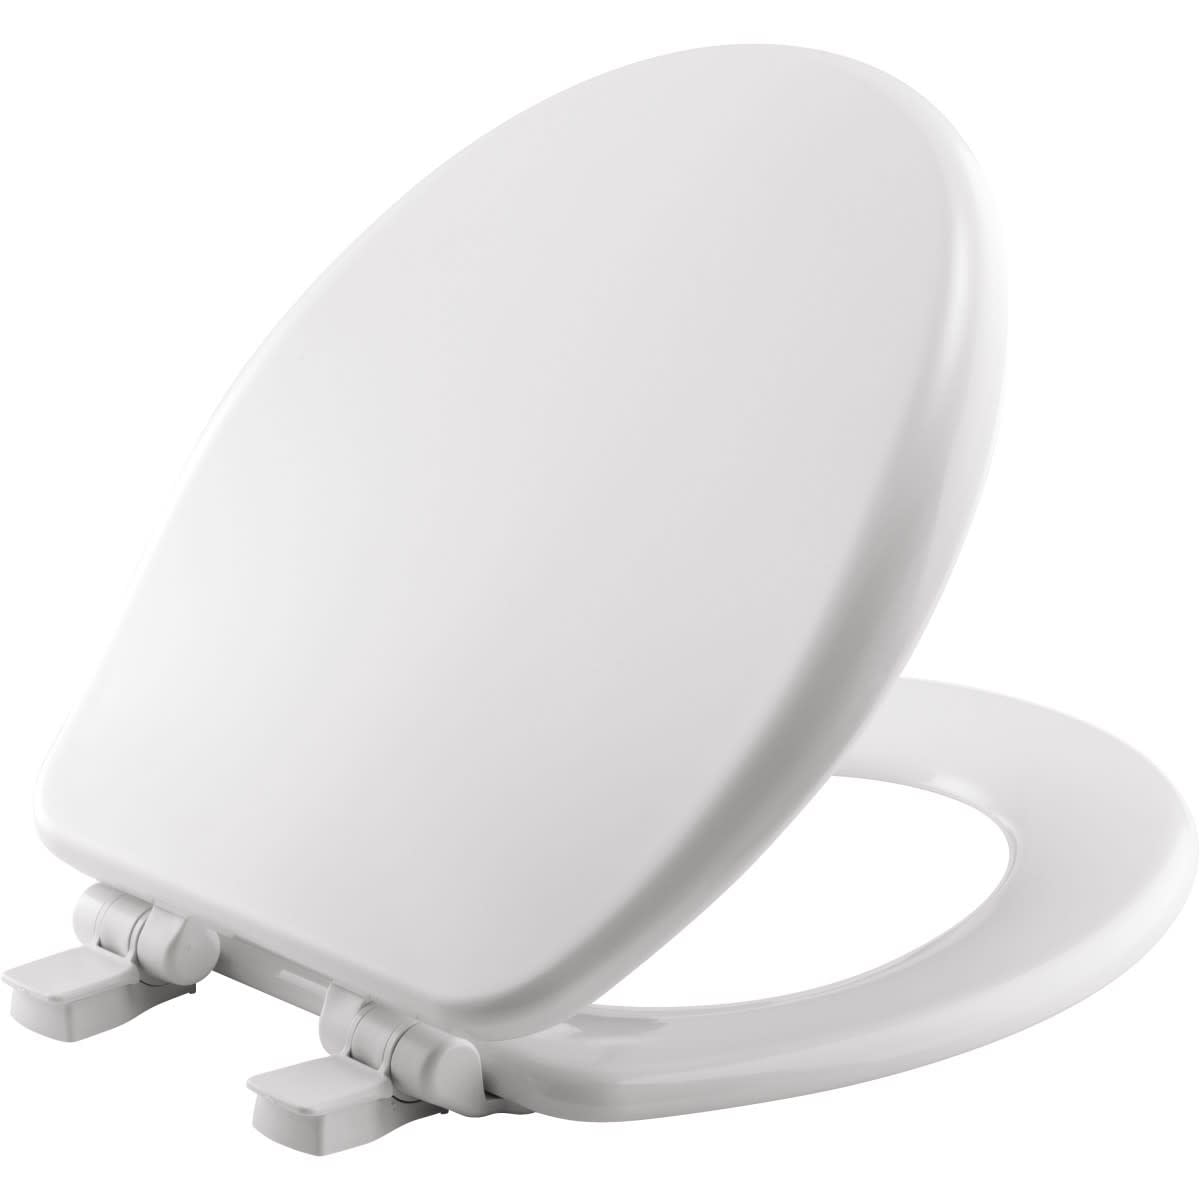 Mayfair 113 000 Deluxe Soft Elongated Toilet Seat 